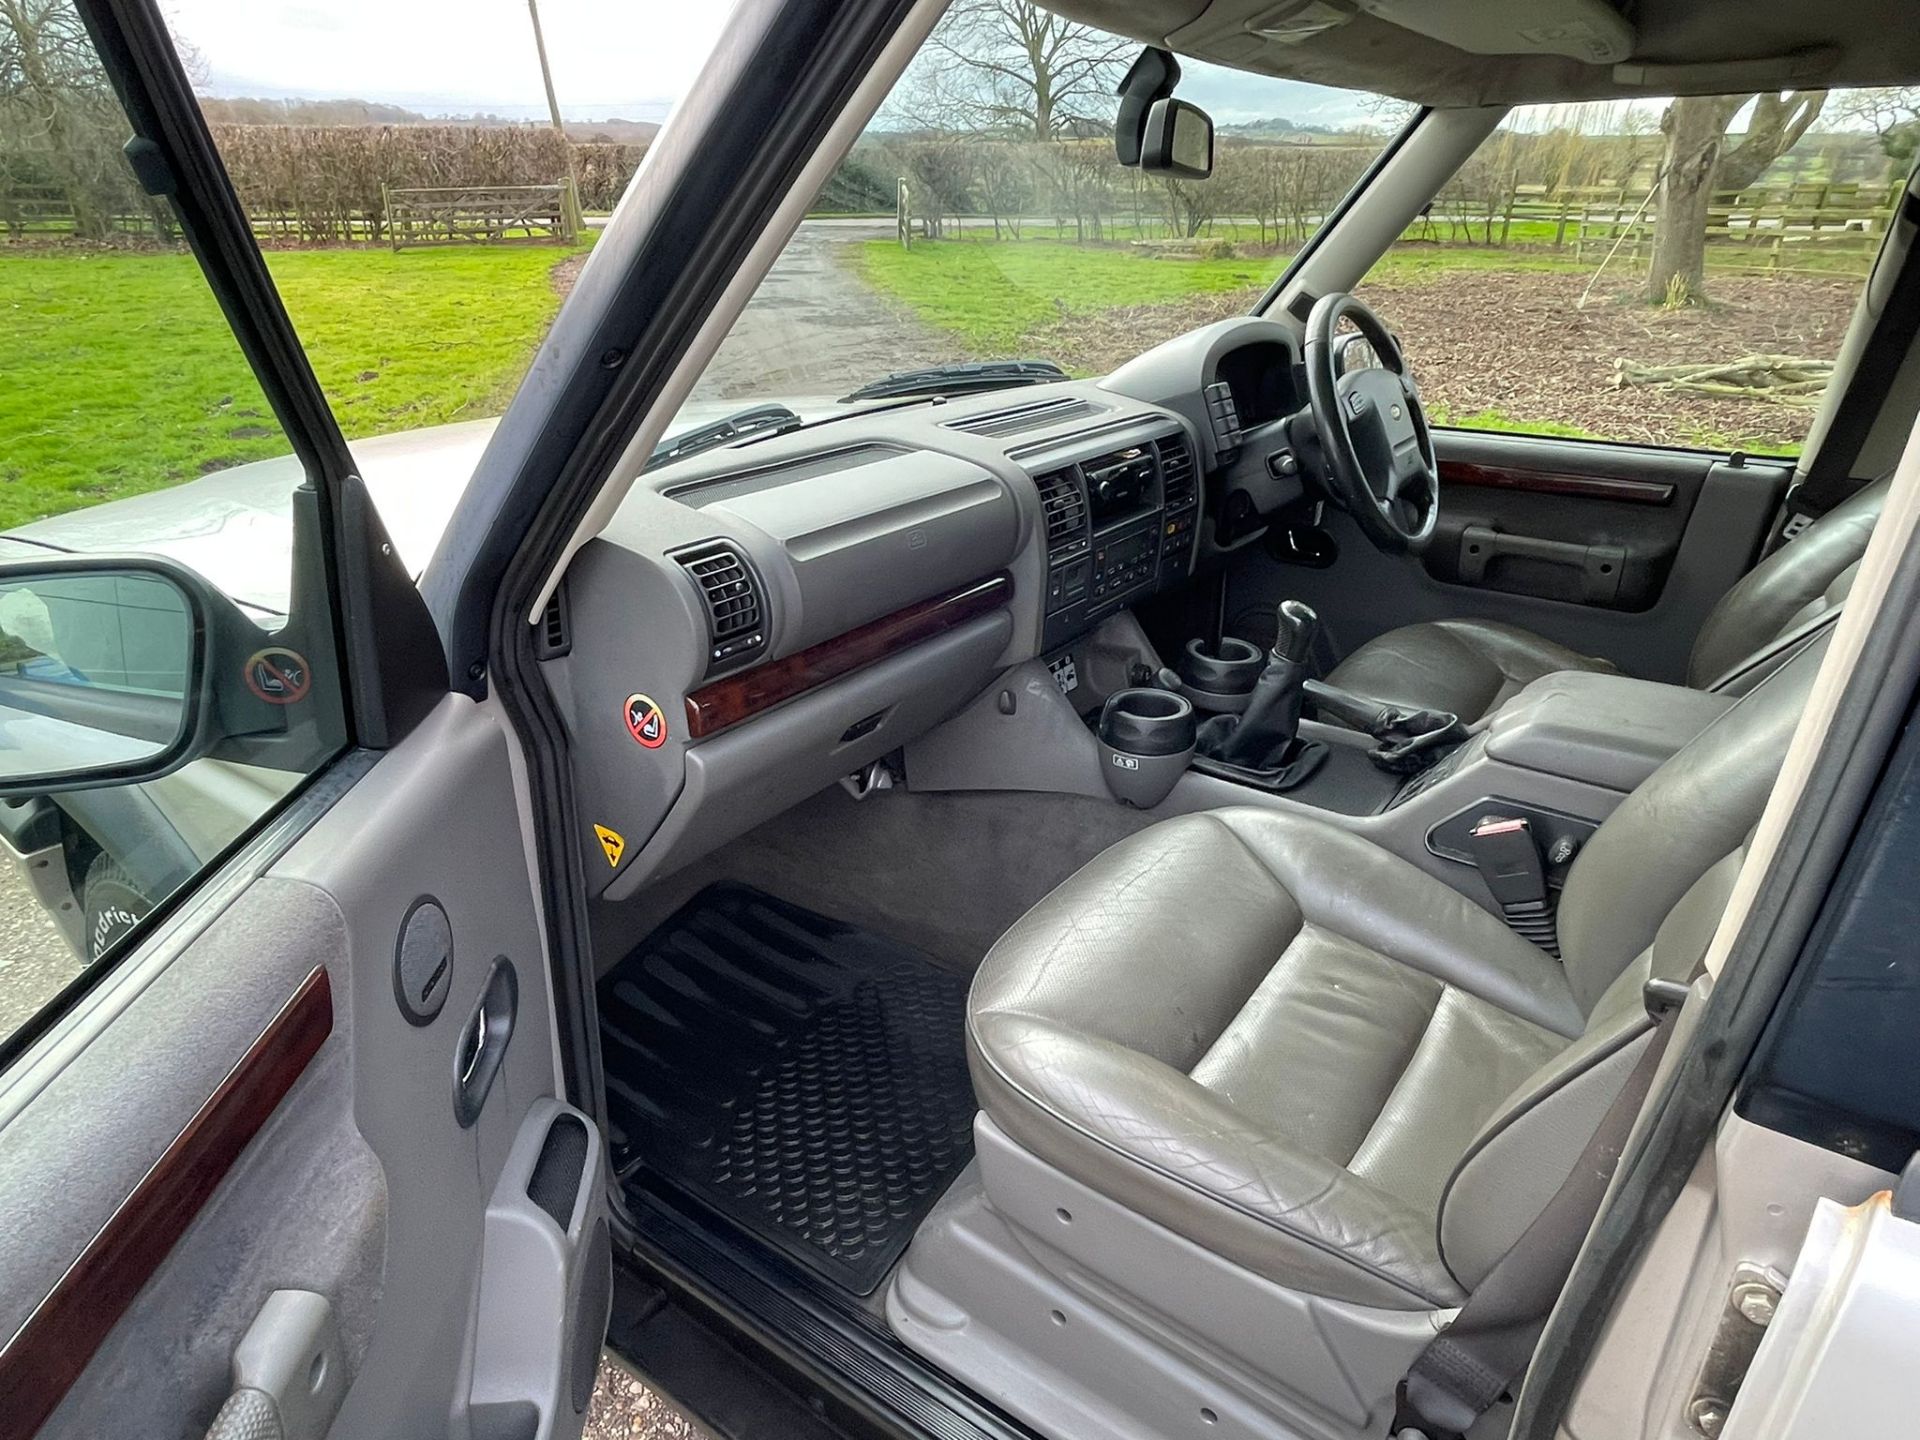 2000 LAND ROVER DISCOVERY TD5 ES SILVER ESTATE, 271,031 MILES, GALVANISED CHASSIS *NO VAT* - Image 10 of 17